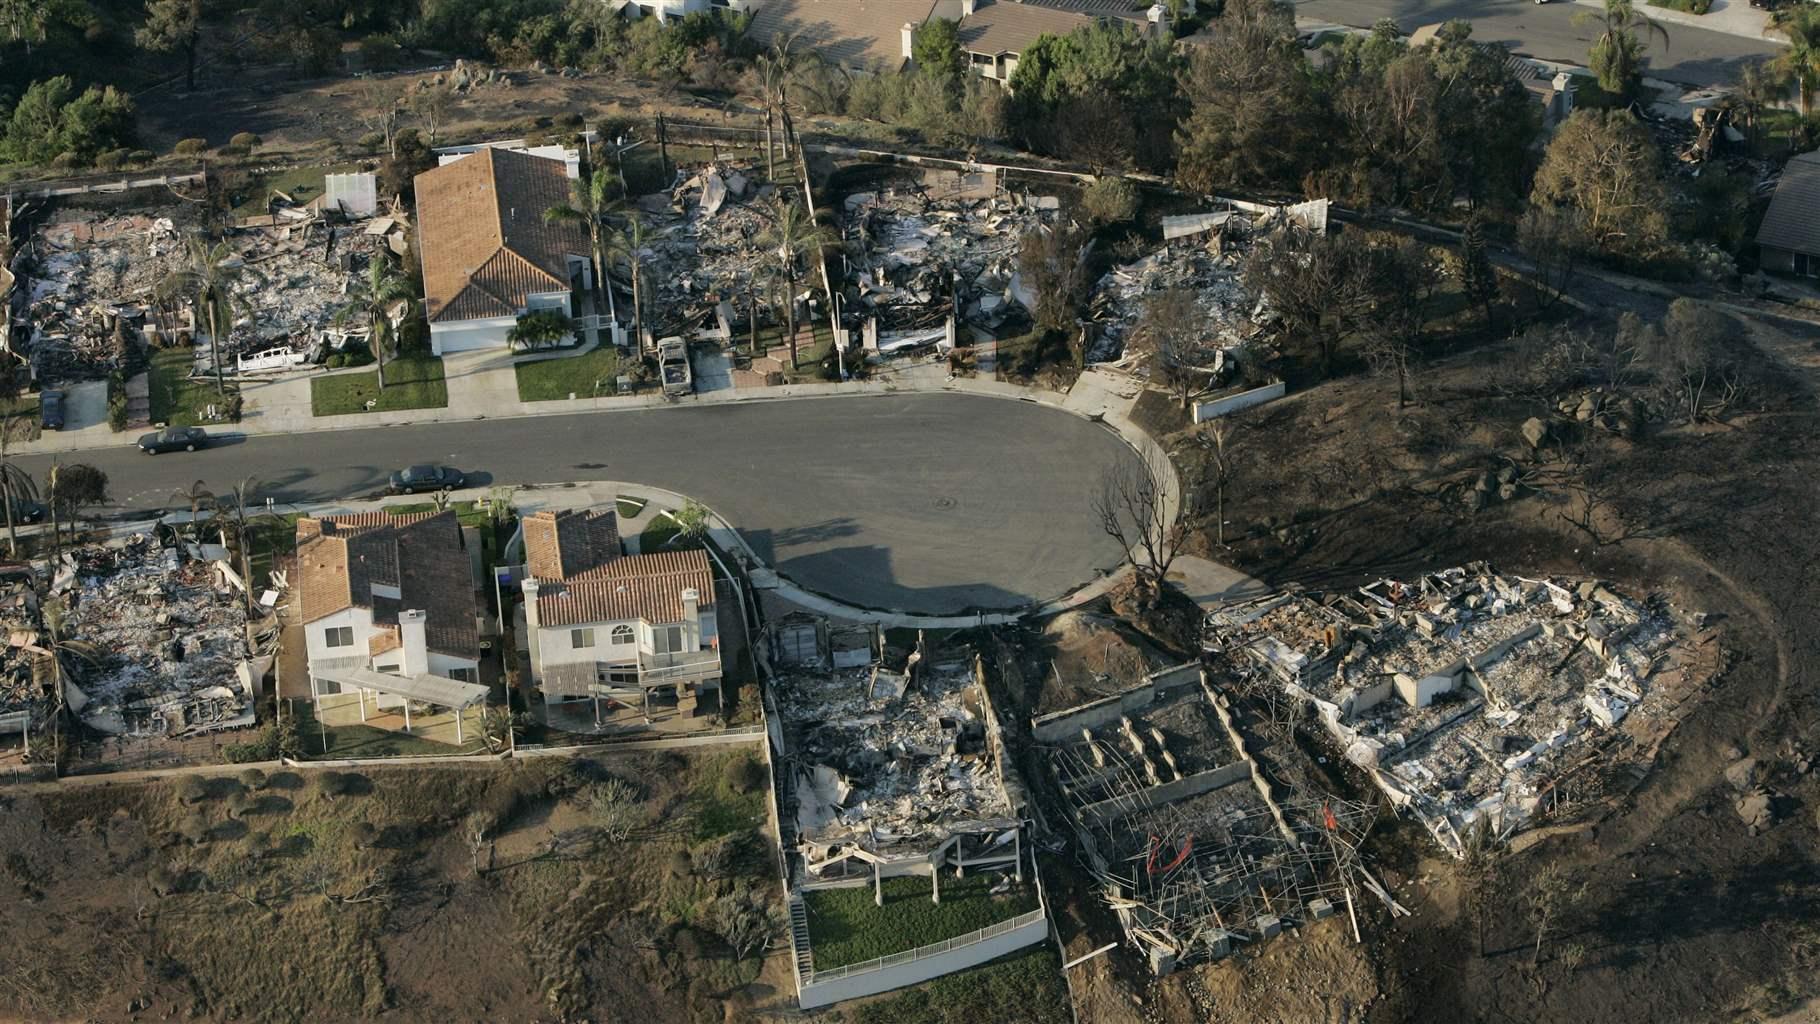 Aerial view showing a cul-de-sac at the edge of a neighborhood where most homes have been destroyed by wildfires. Some brown patches of land and stands of trees are also visible.